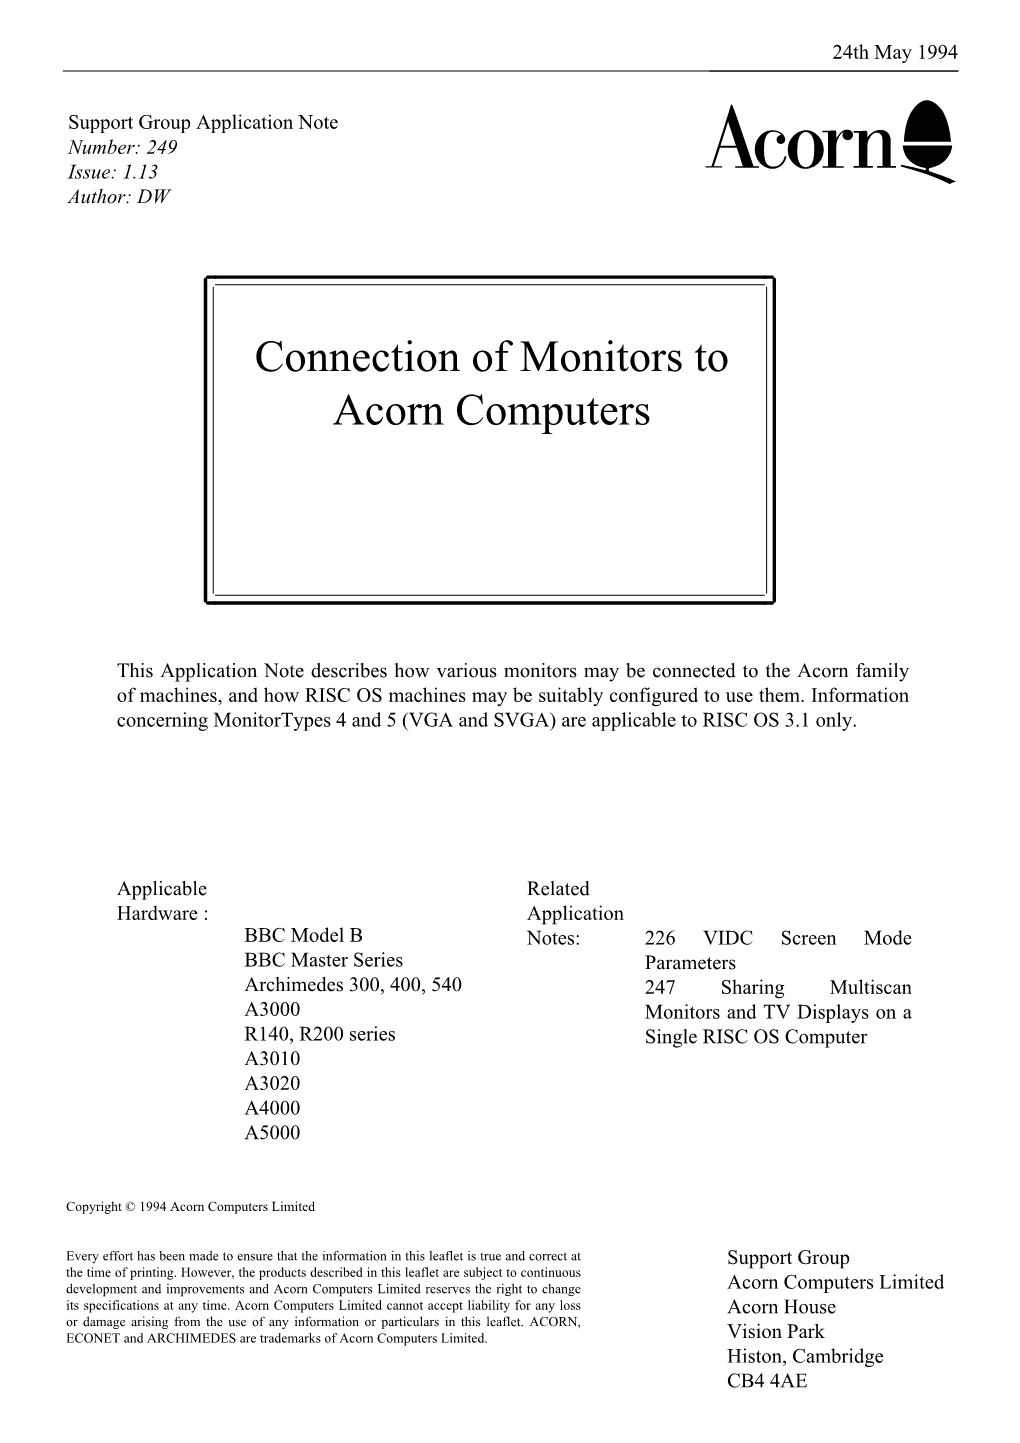 Connection of Monitors to Acorn Computers